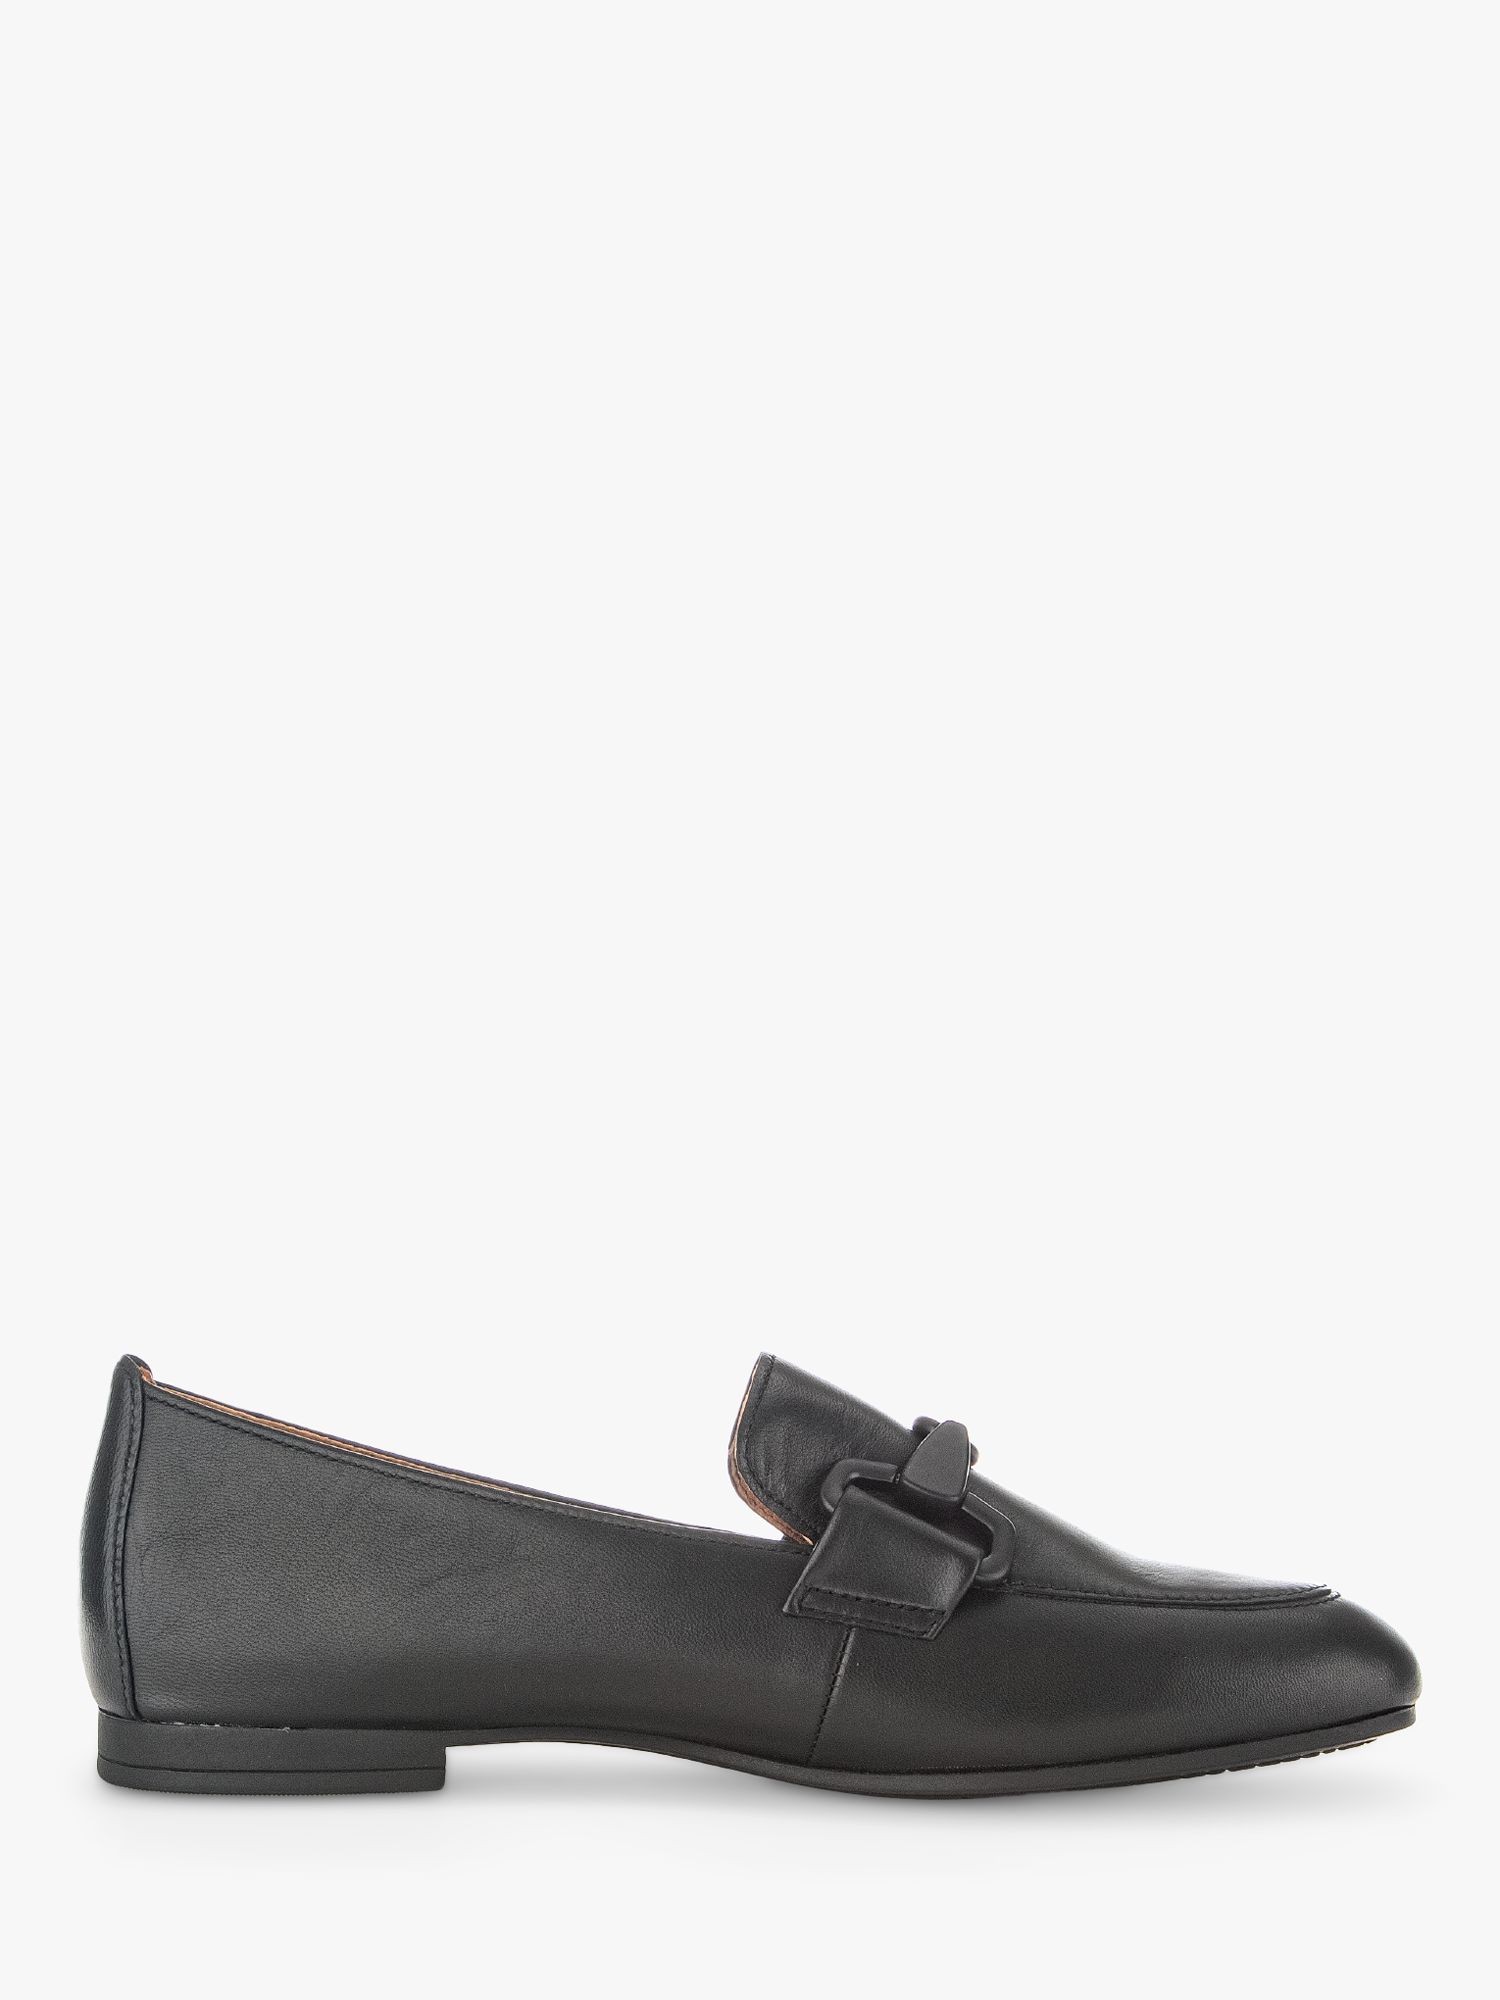 Gabor Jangle Leather Loafers, Black at John Lewis & Partners